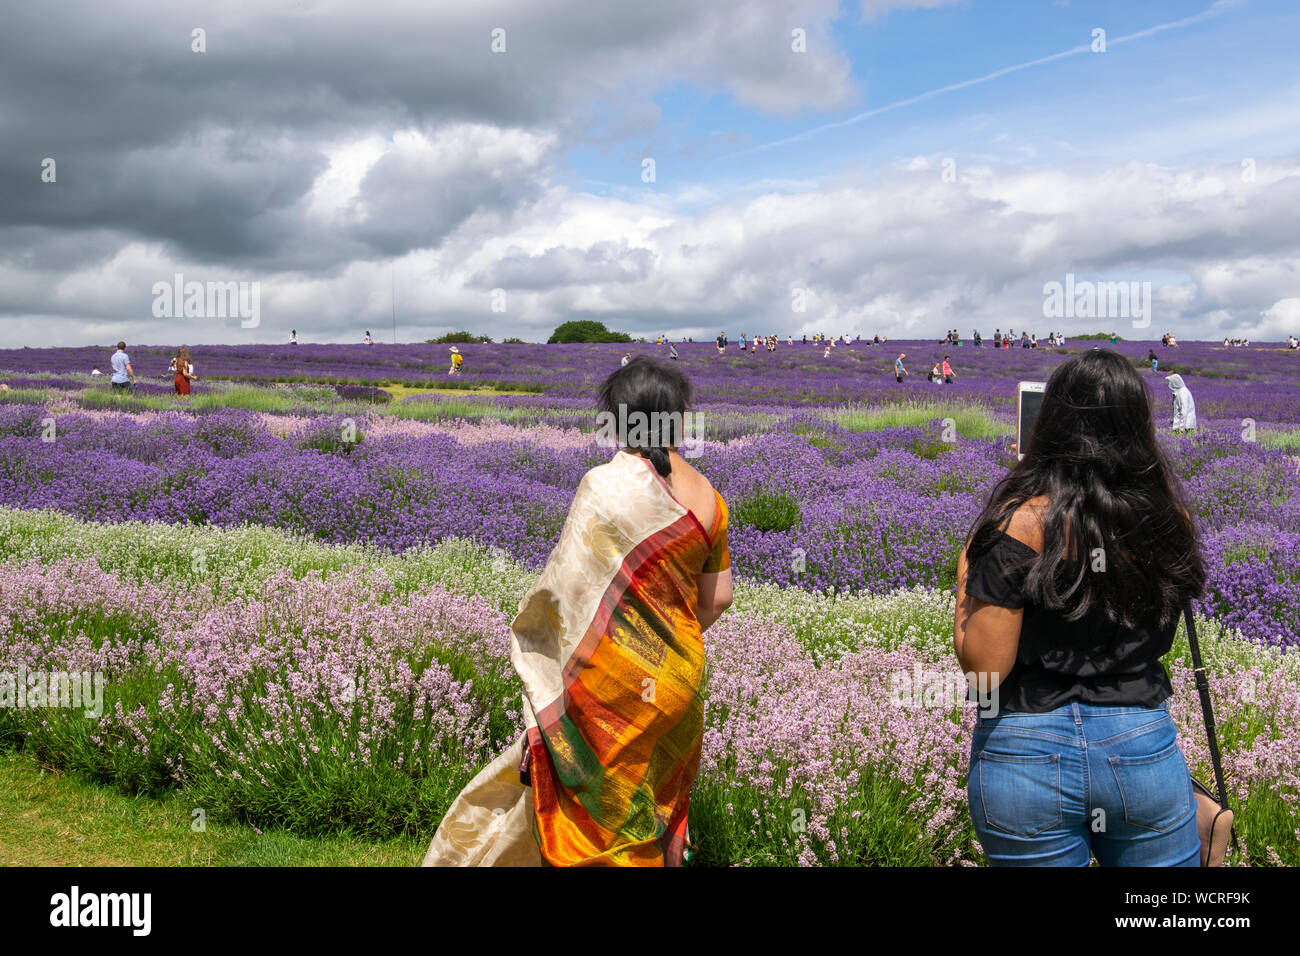 Tourists visiting the lavender fields at Snowshill in the Cotswolds, Worcestershire, England, UK Stock Photo